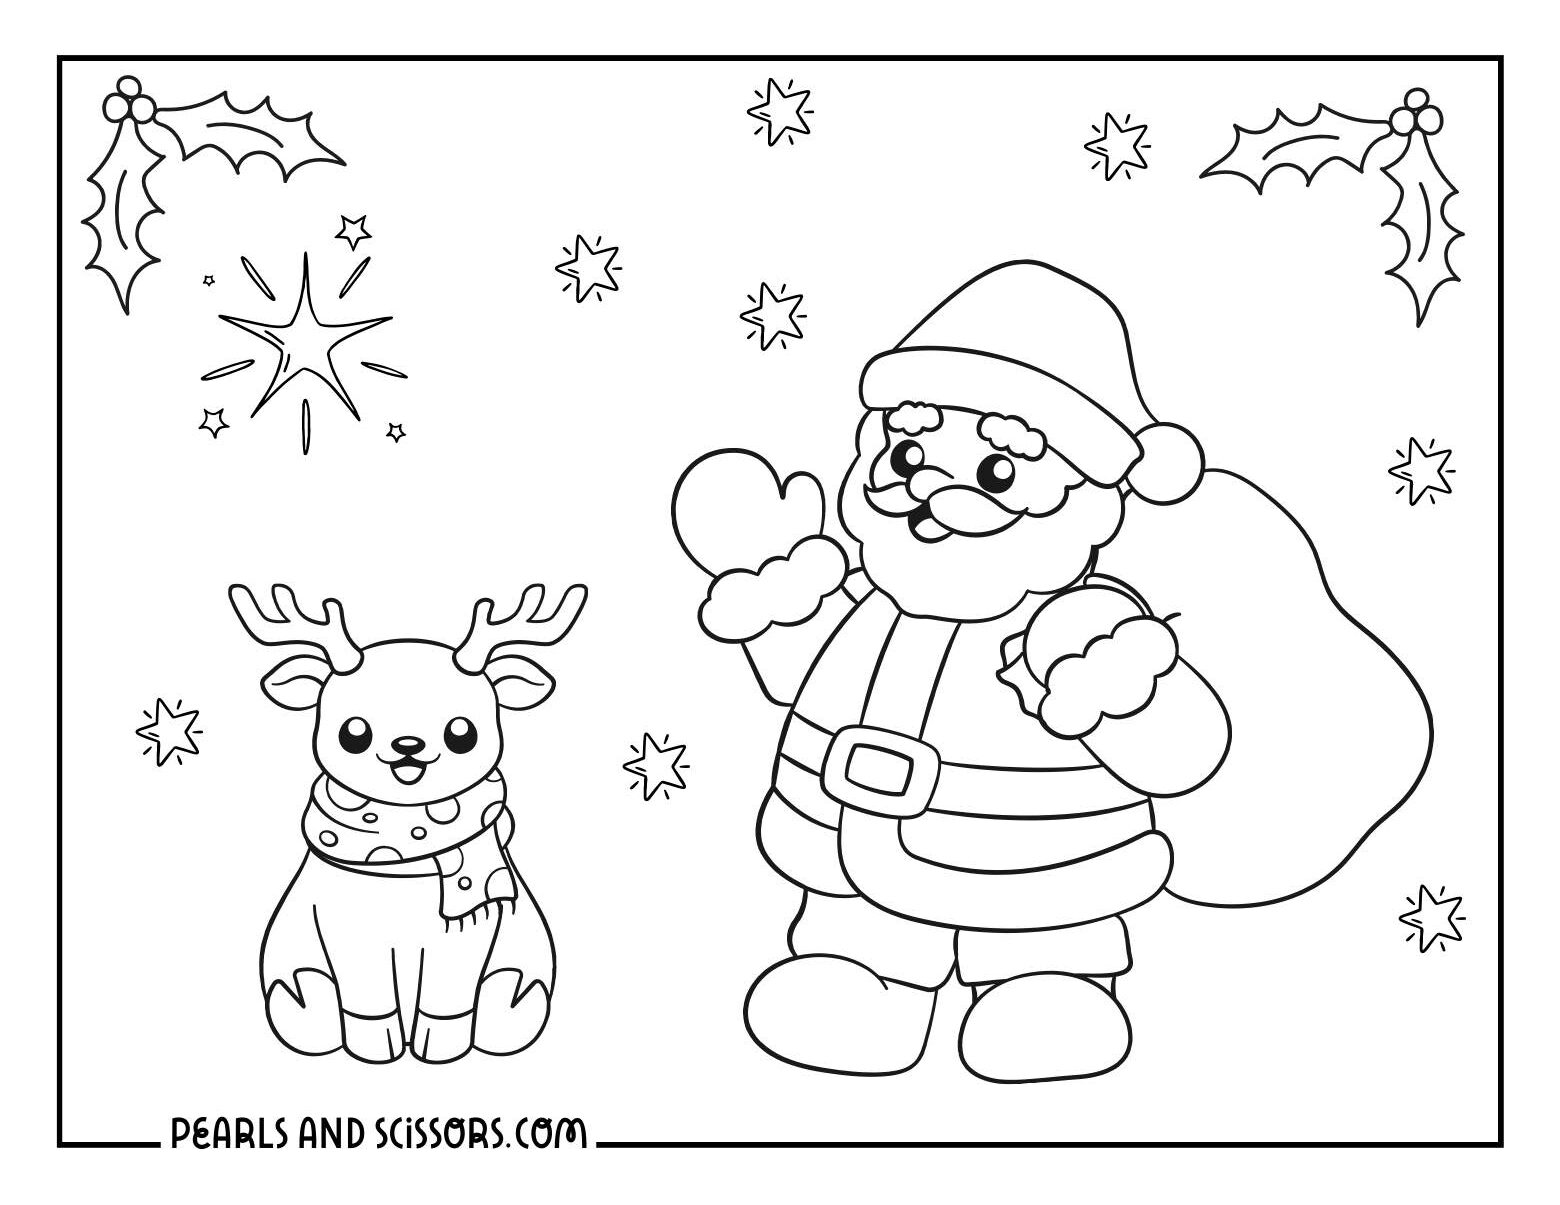 Santa claus with a reindeer christmas coloring page for kids.